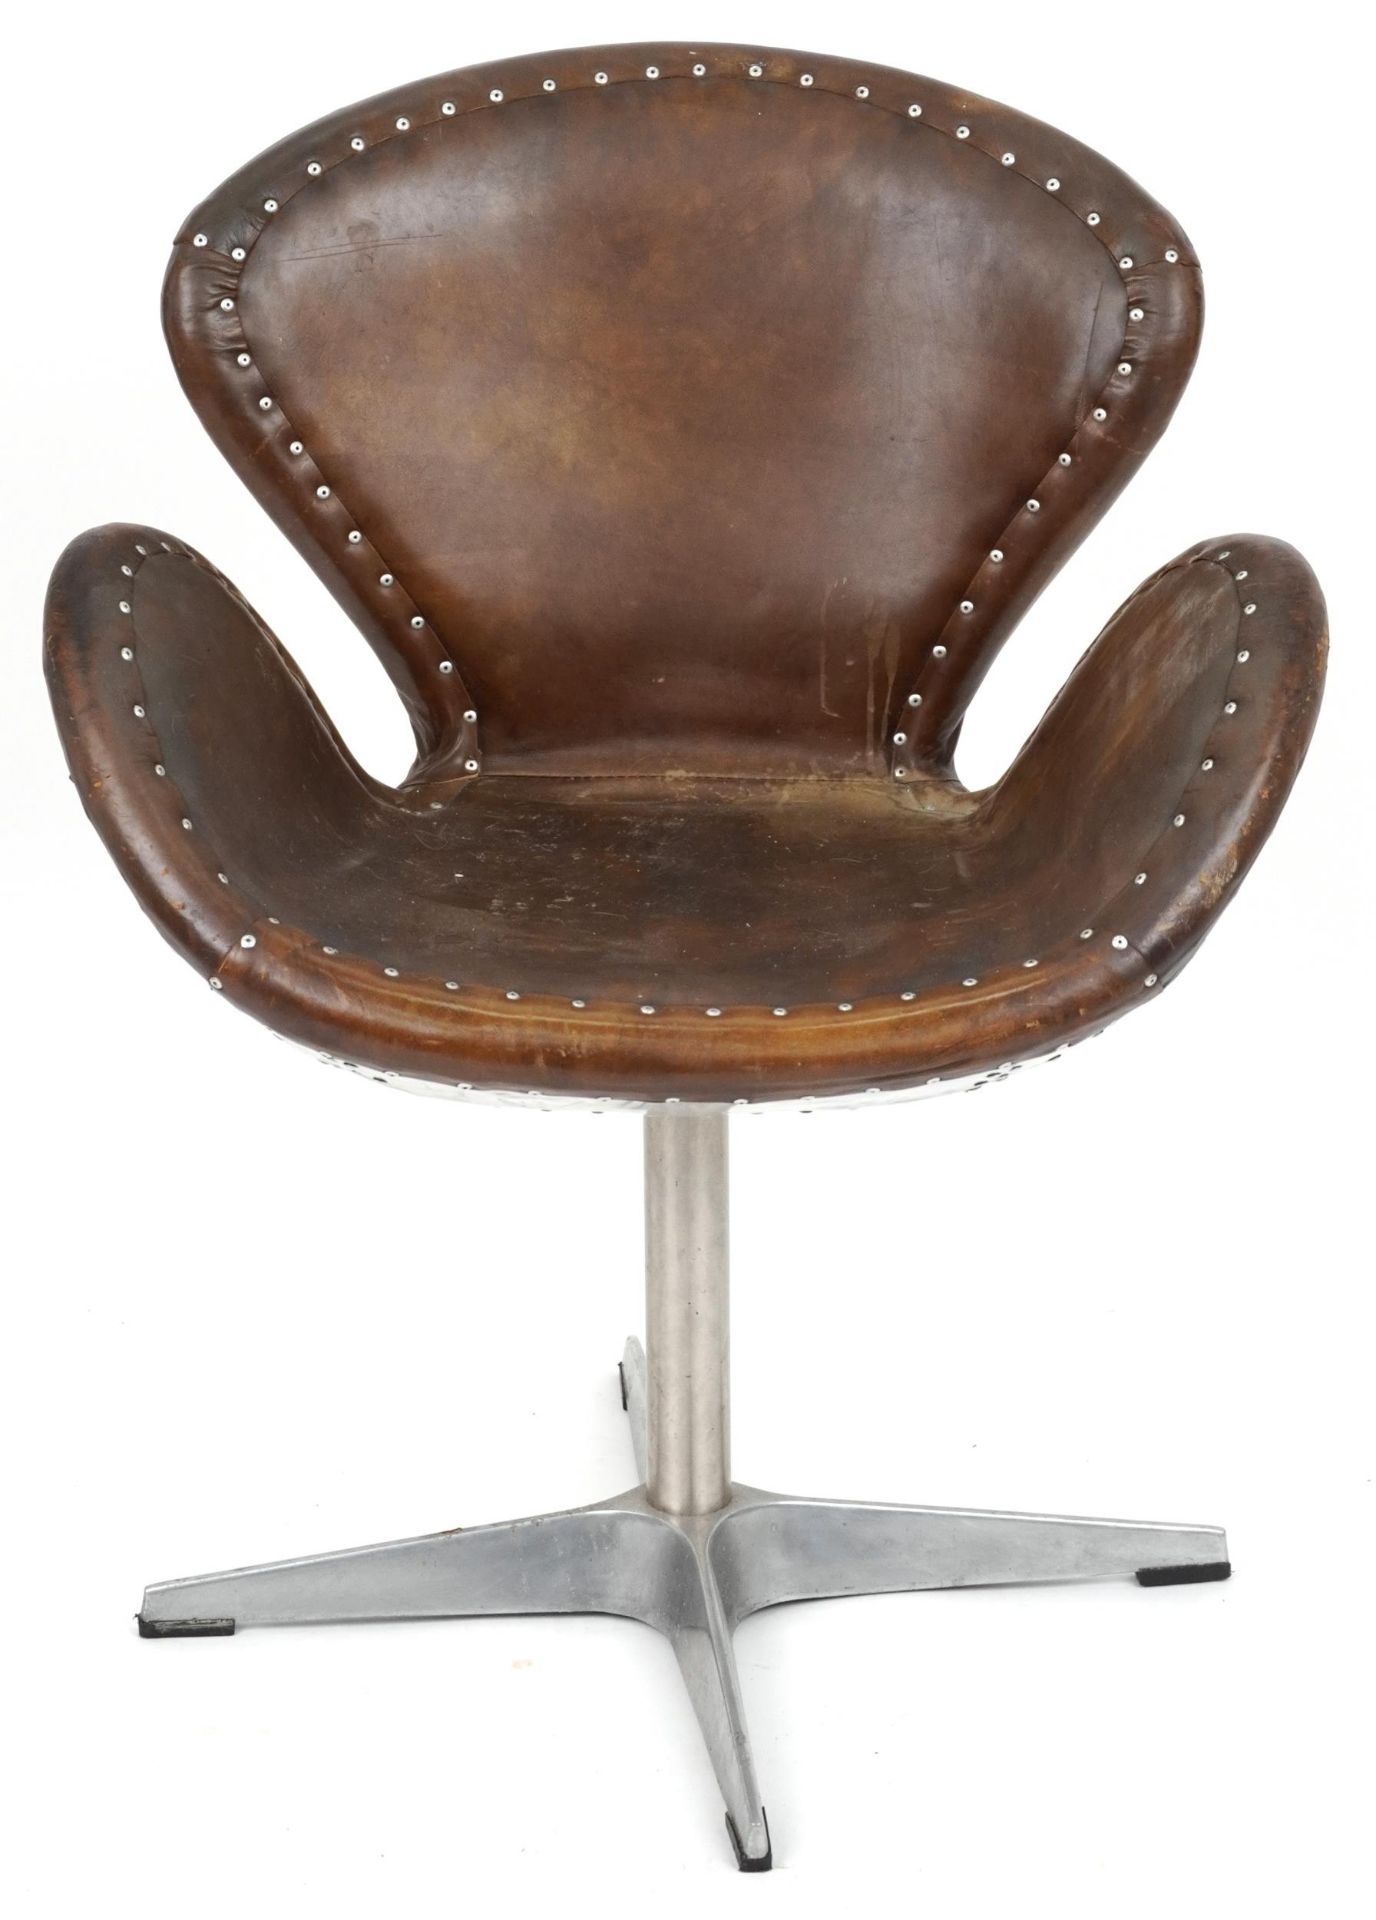 Timothy Oulton aviation interest Devon Spitfire swivel chair with brown leather upholstery, 90cm - Image 2 of 4